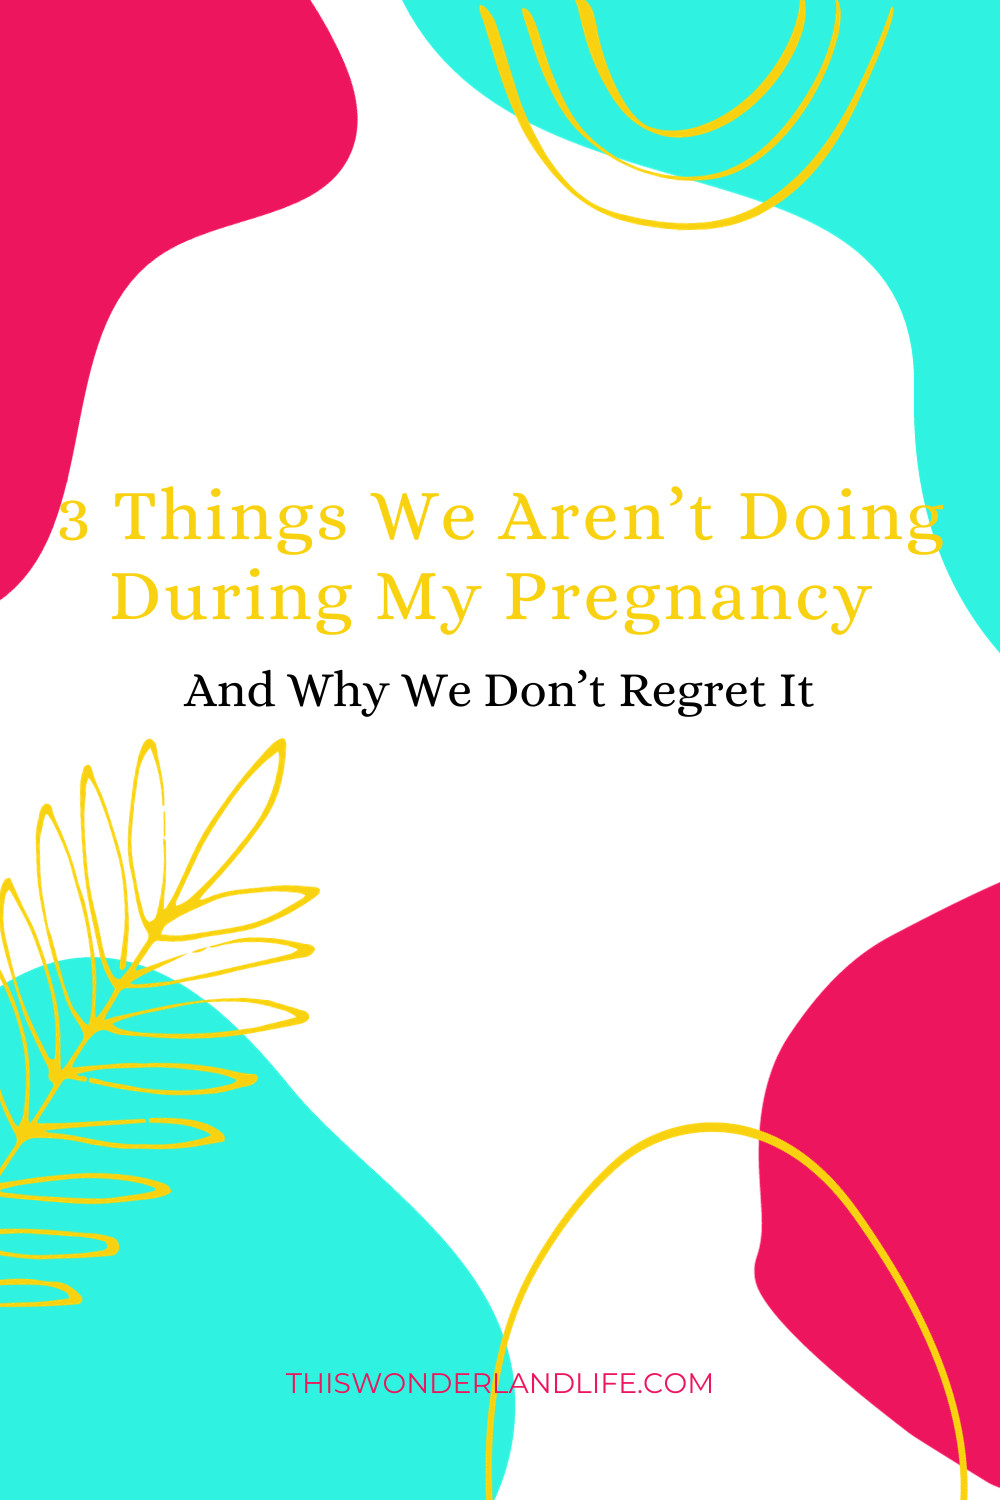 3 Things We Aren't Doing This Pregnancy (And Why We Don't Regret It)